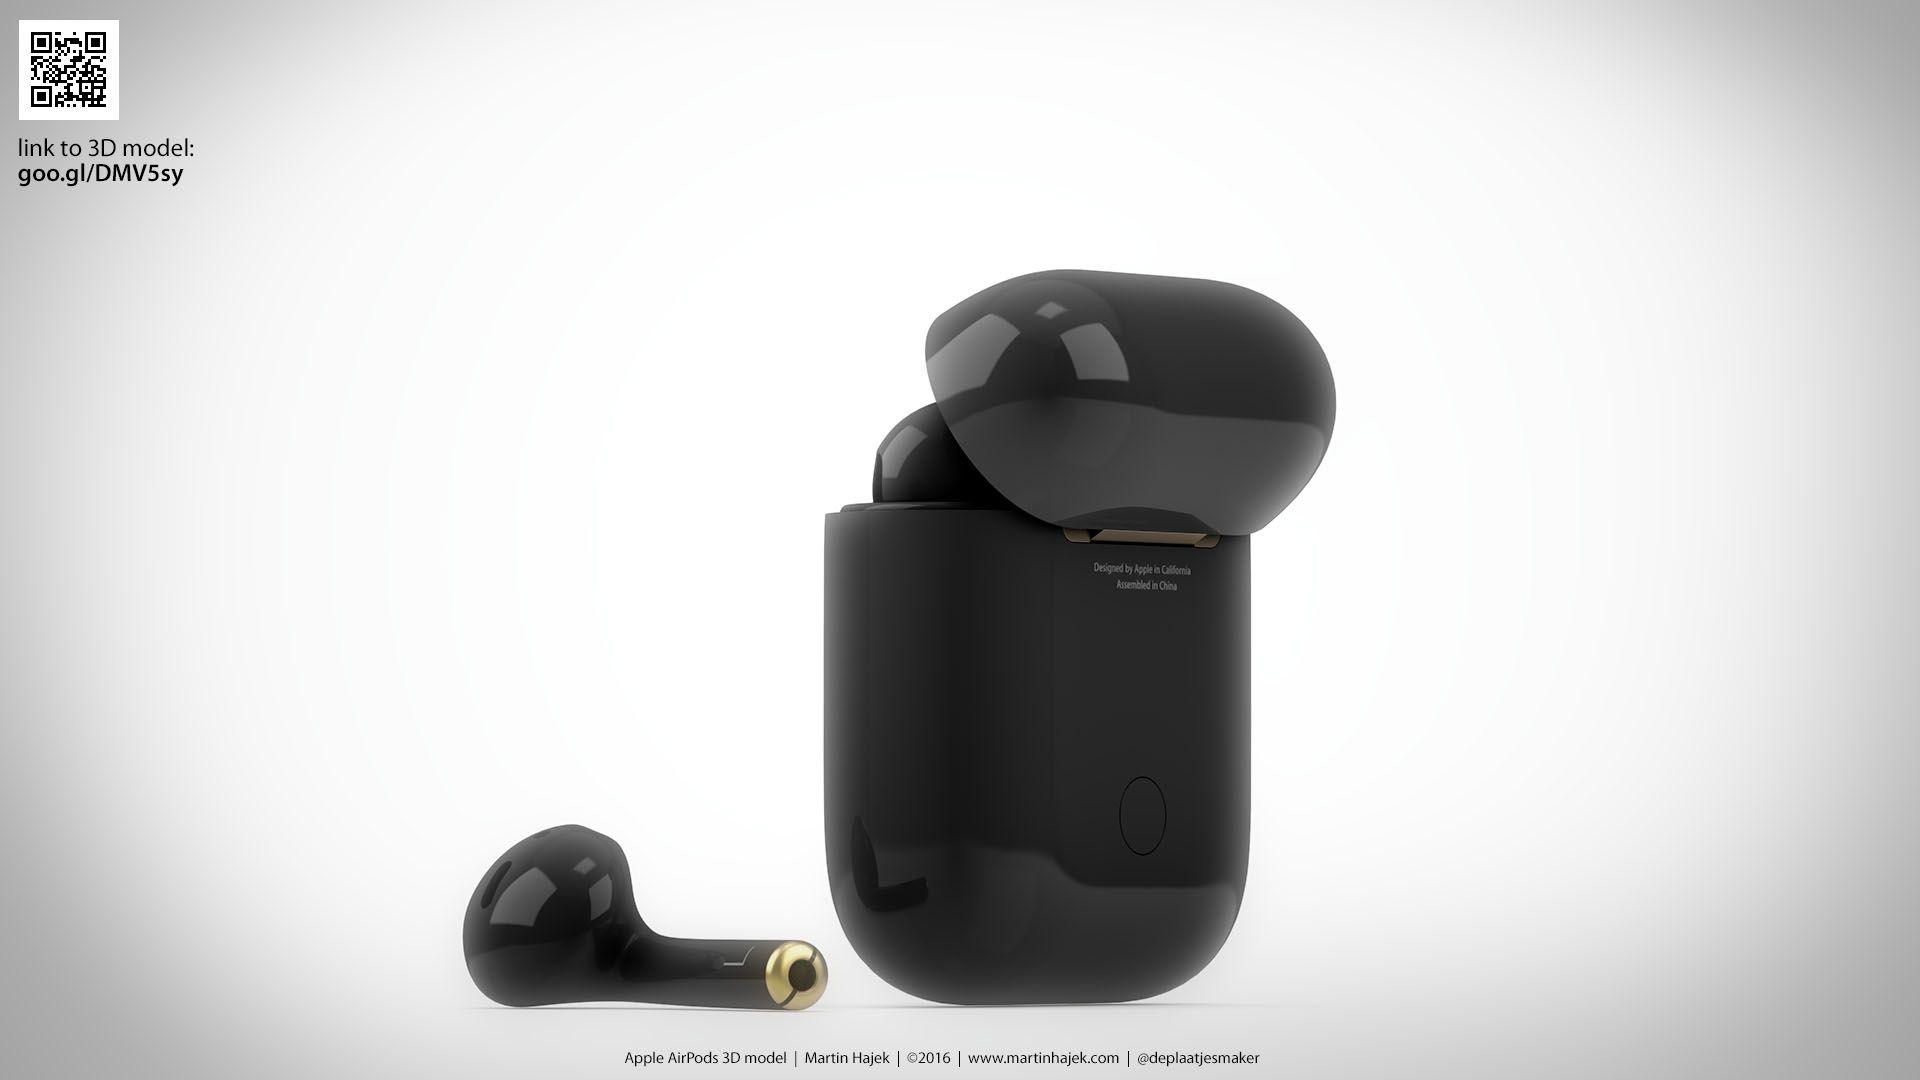 Don't like the color of your AirPods? Have them repainted black to